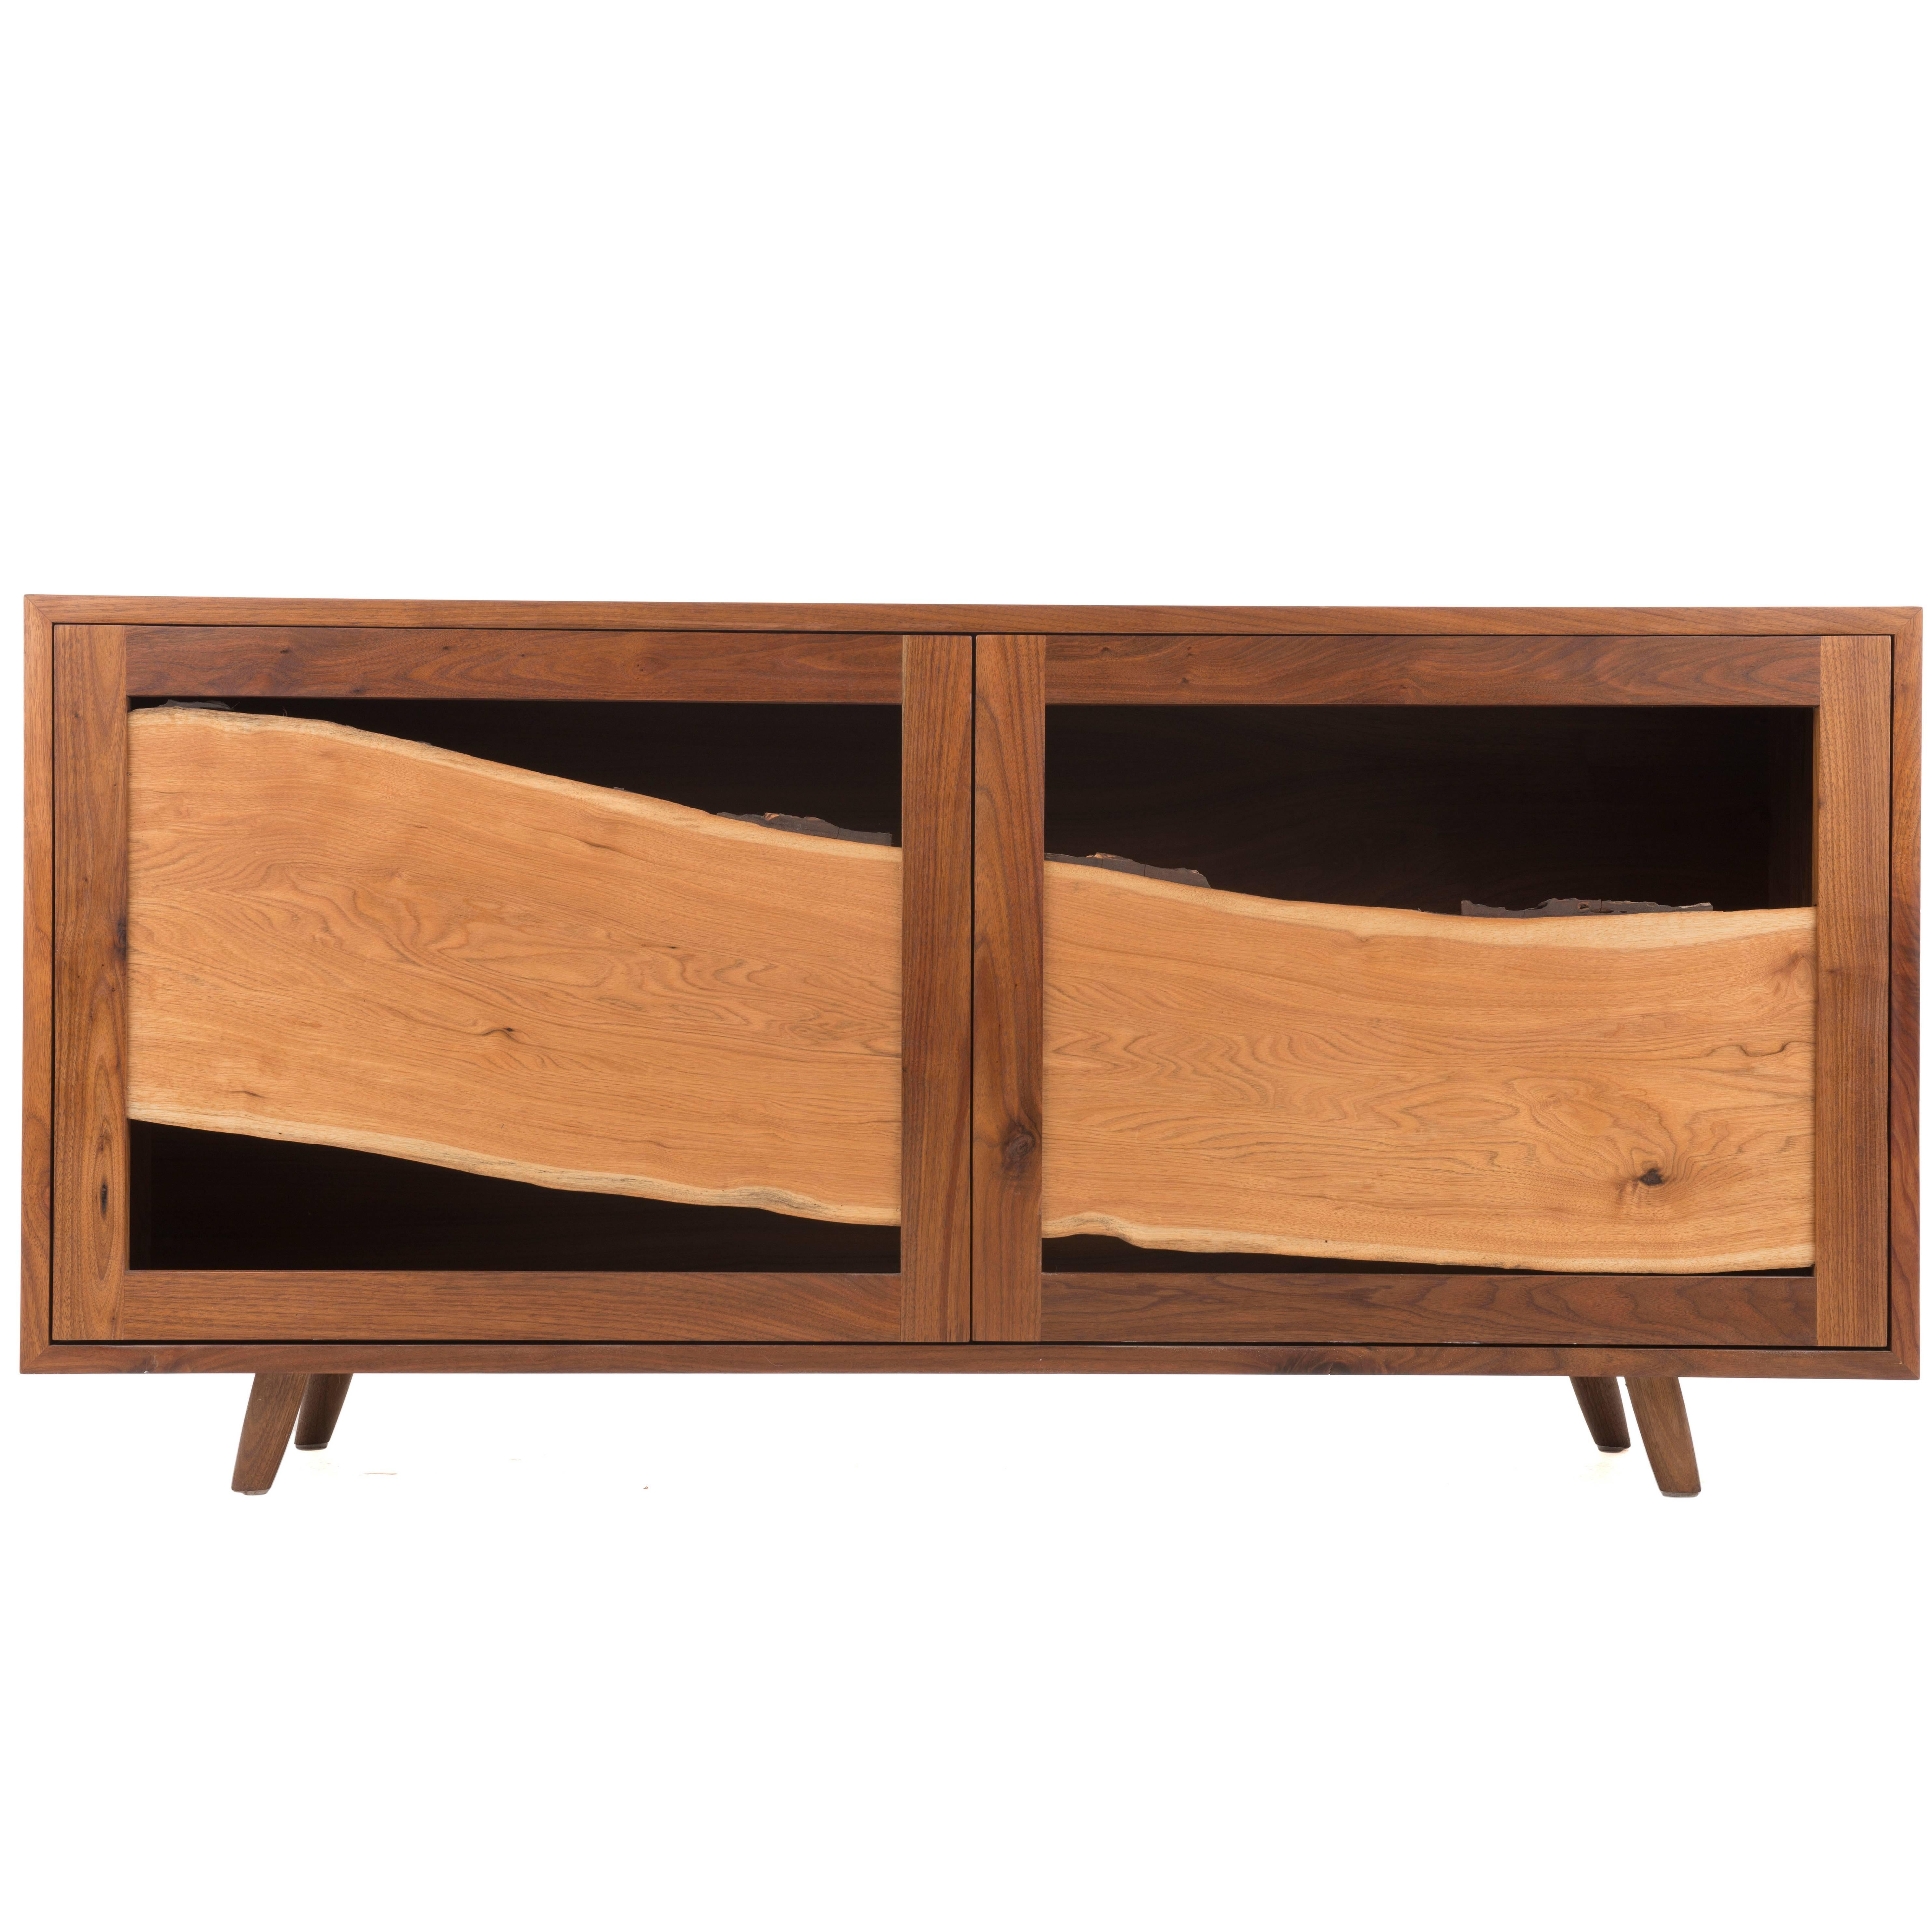 Sweep Cabinet in Black Walnut and Live Edged Butternut with Hand-Turned Legs